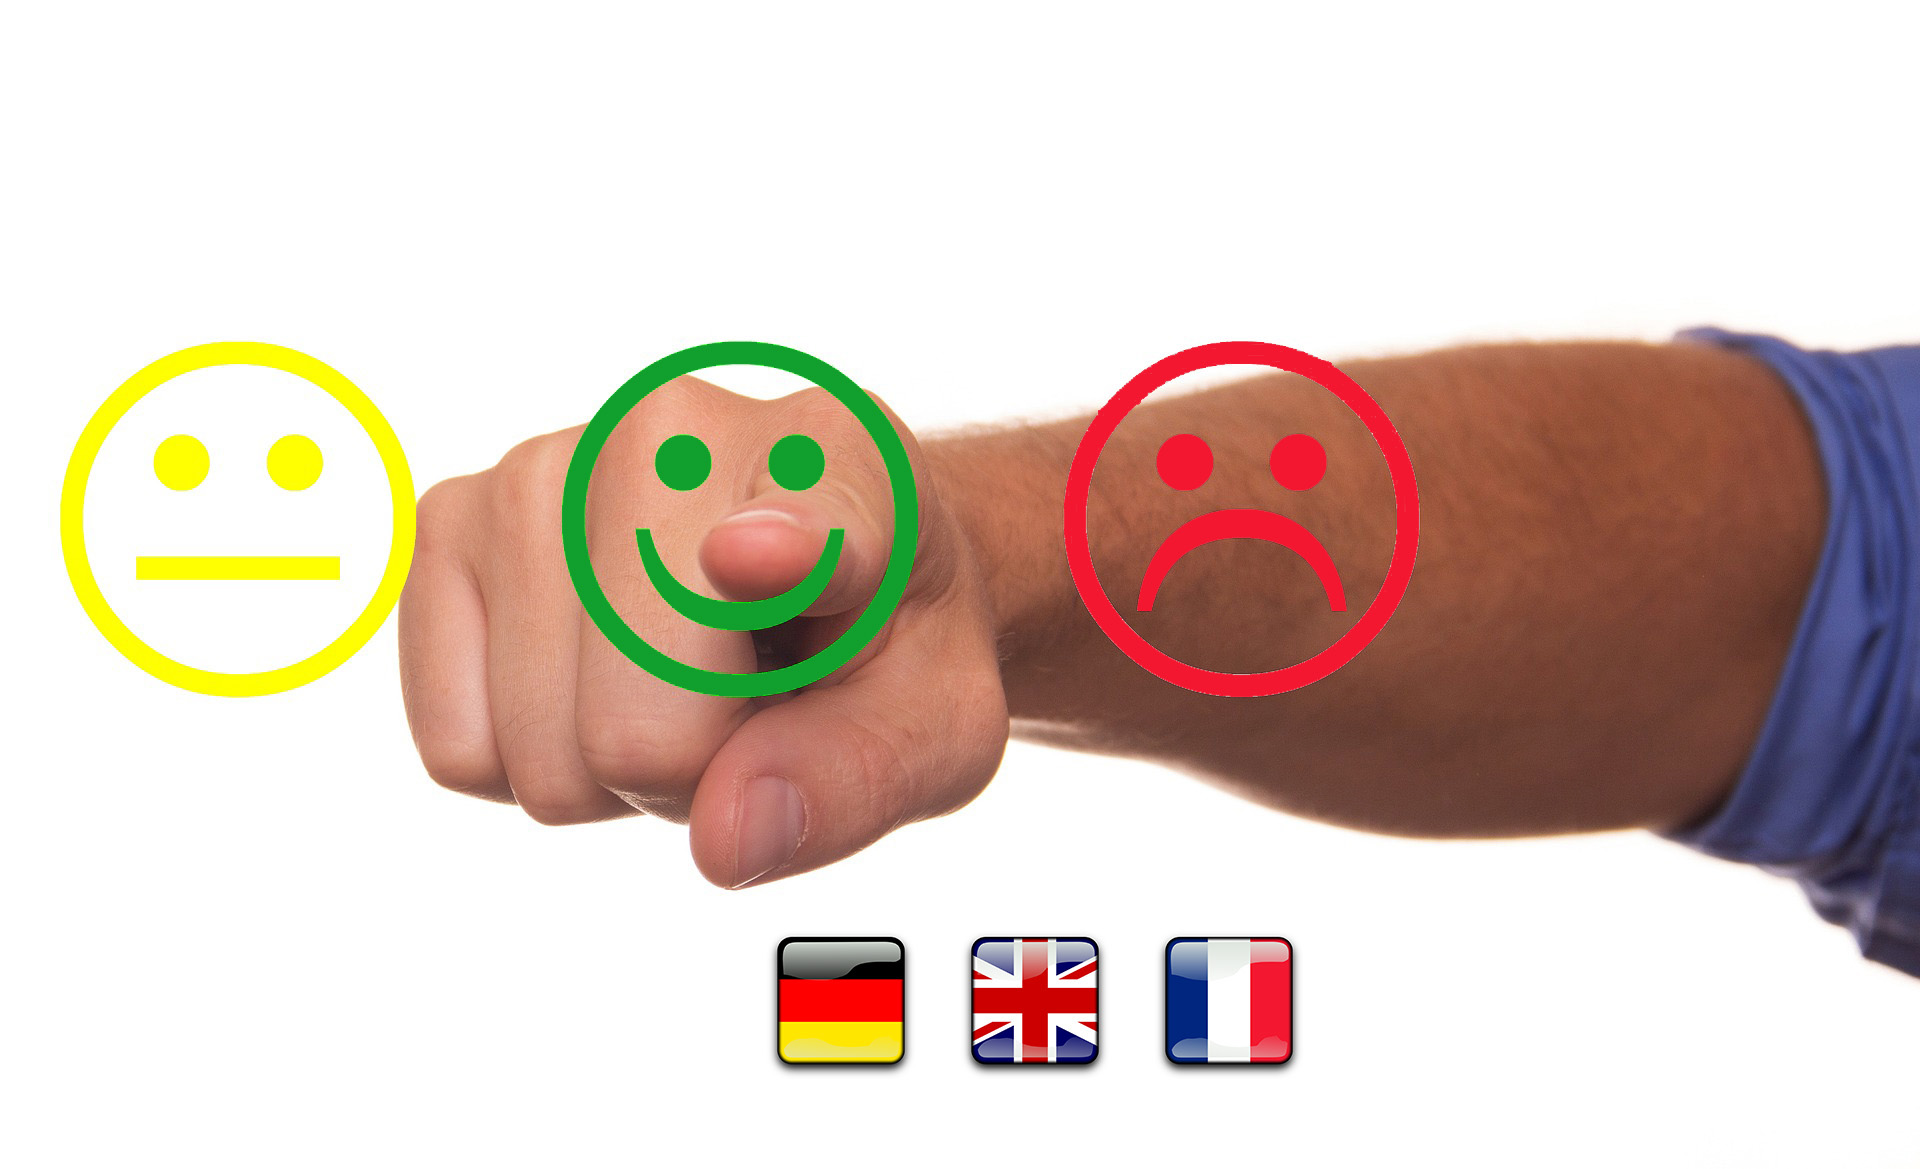 Three icons for rating laughing neutral and sad